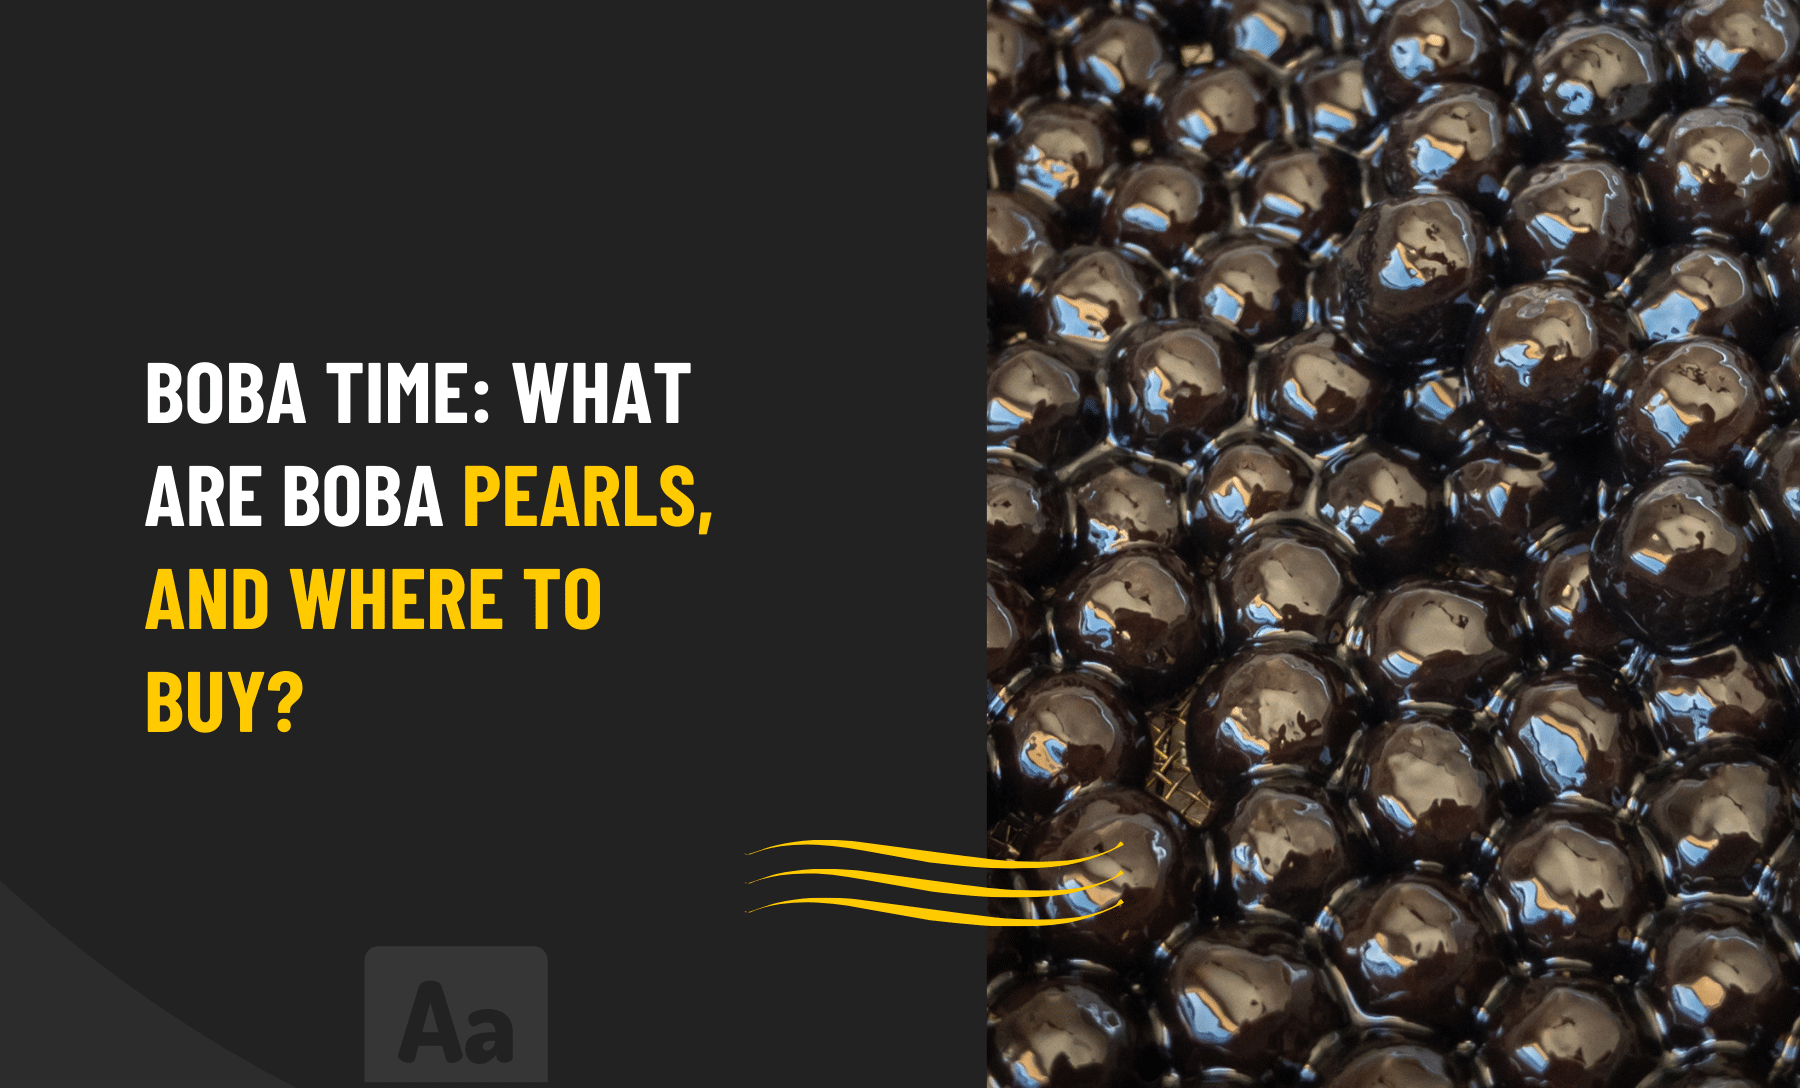 What are boba pearls and where to buy